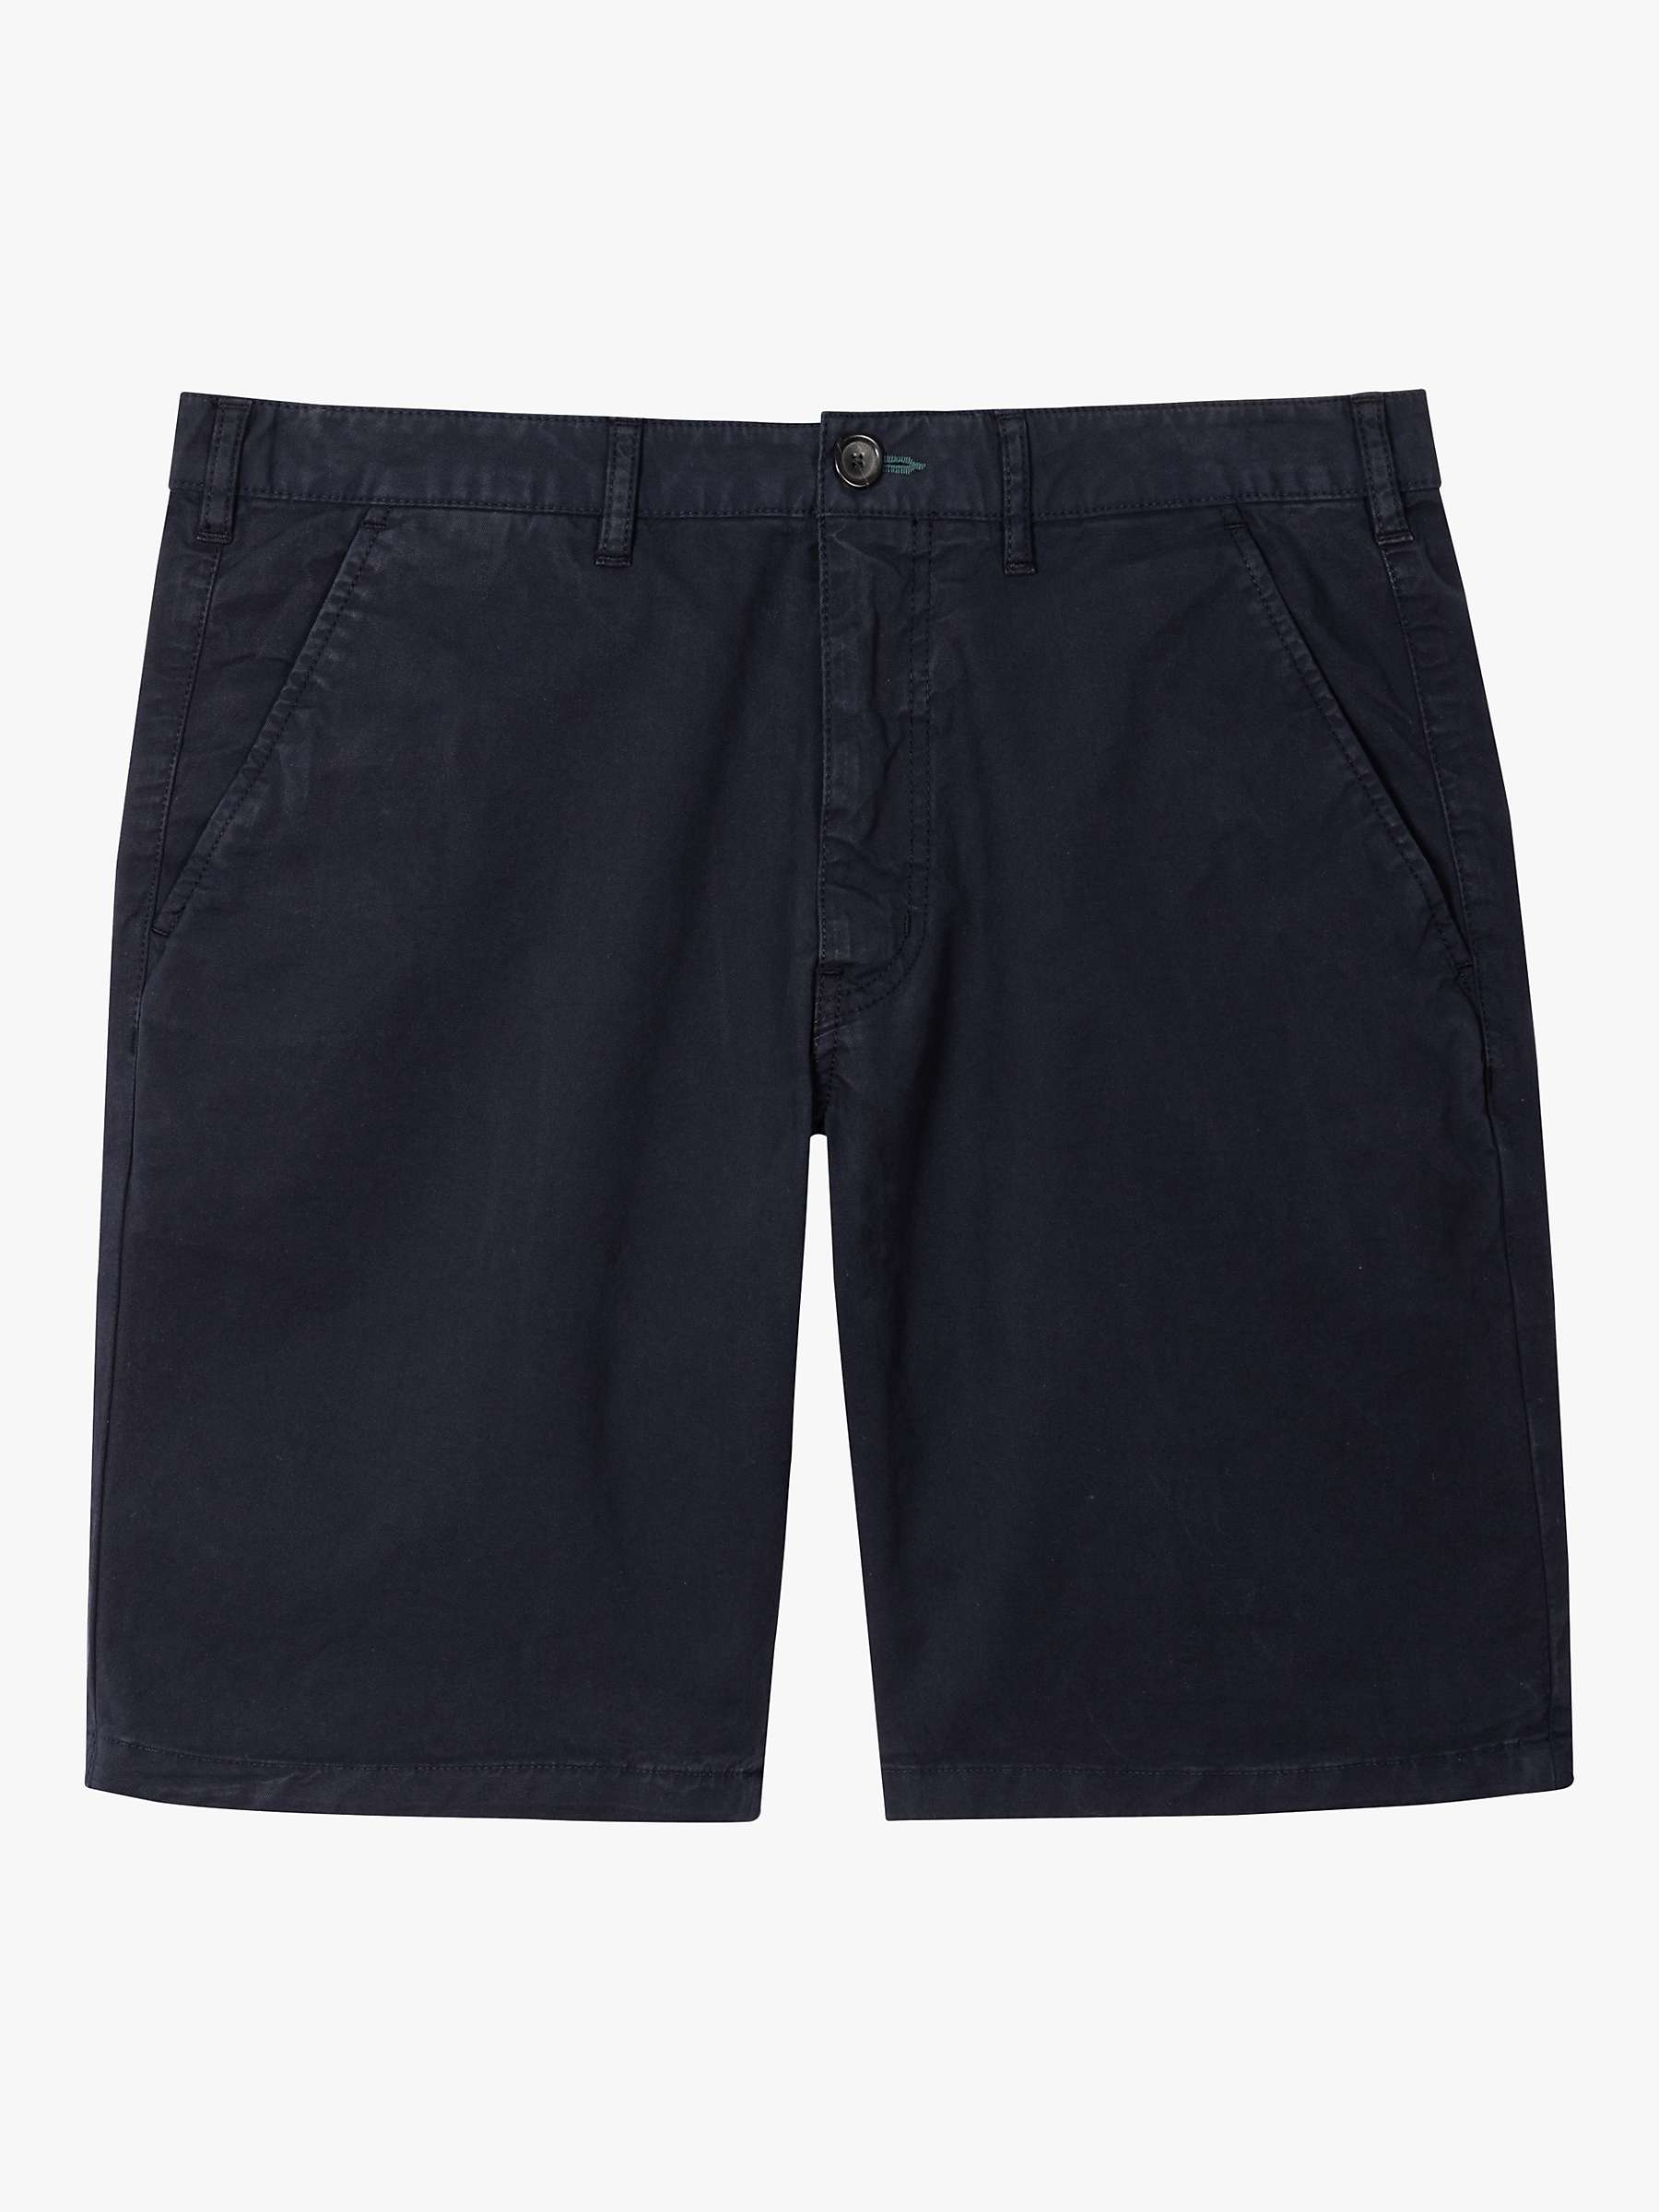 Buy PS Paul Smith Mid Clean Chino Shorts, Blue Online at johnlewis.com